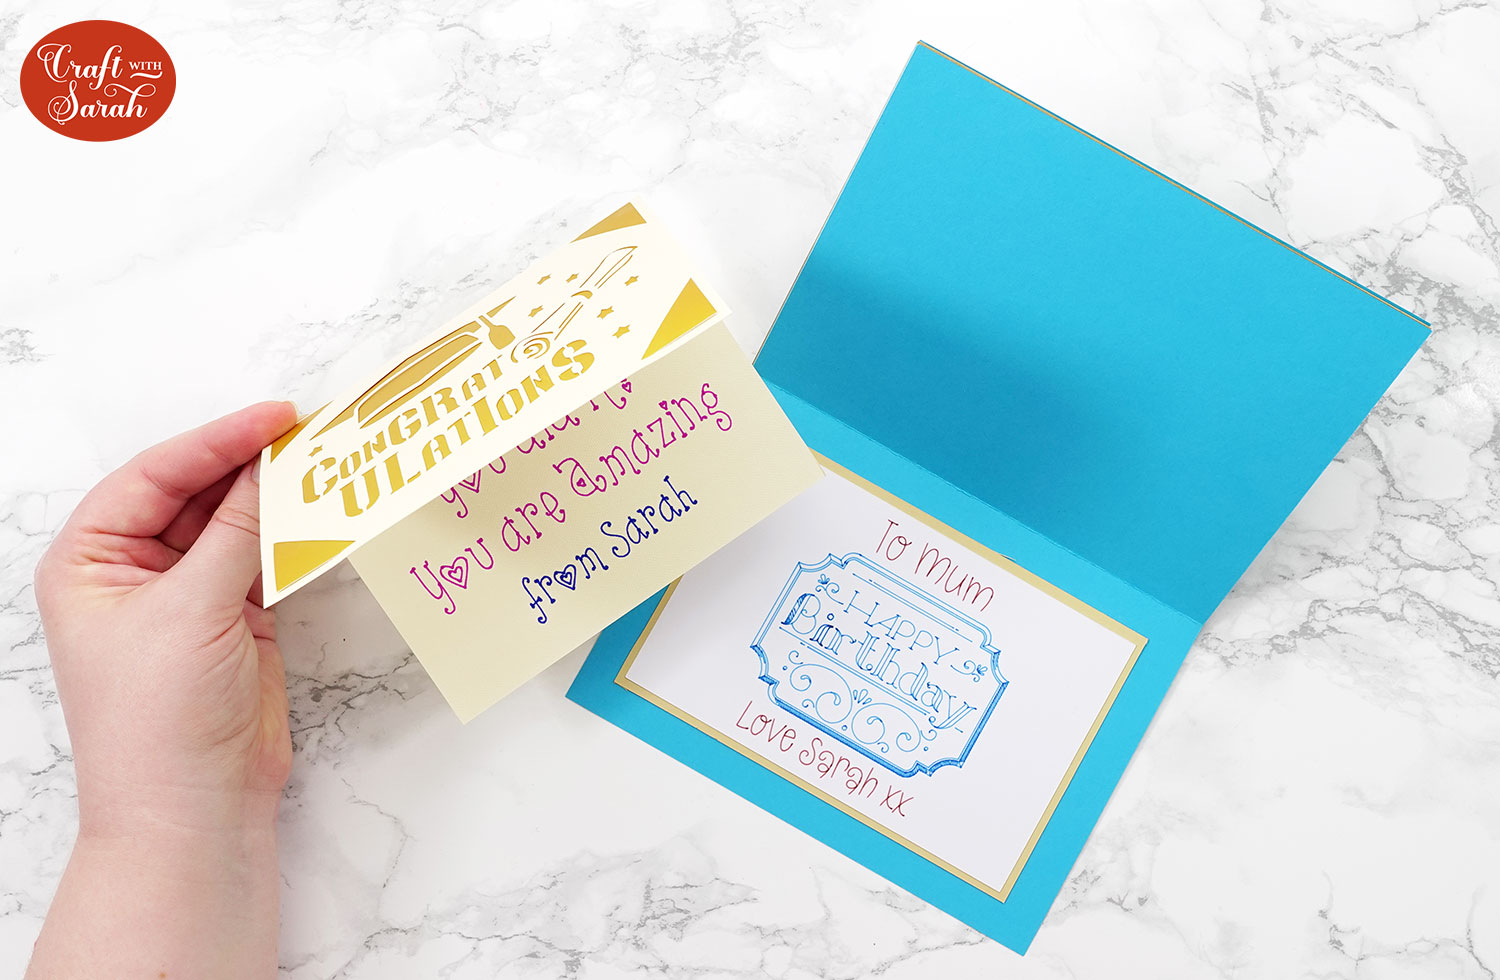 How to Write Inside Cards with a Cricut - Craft with Sarah